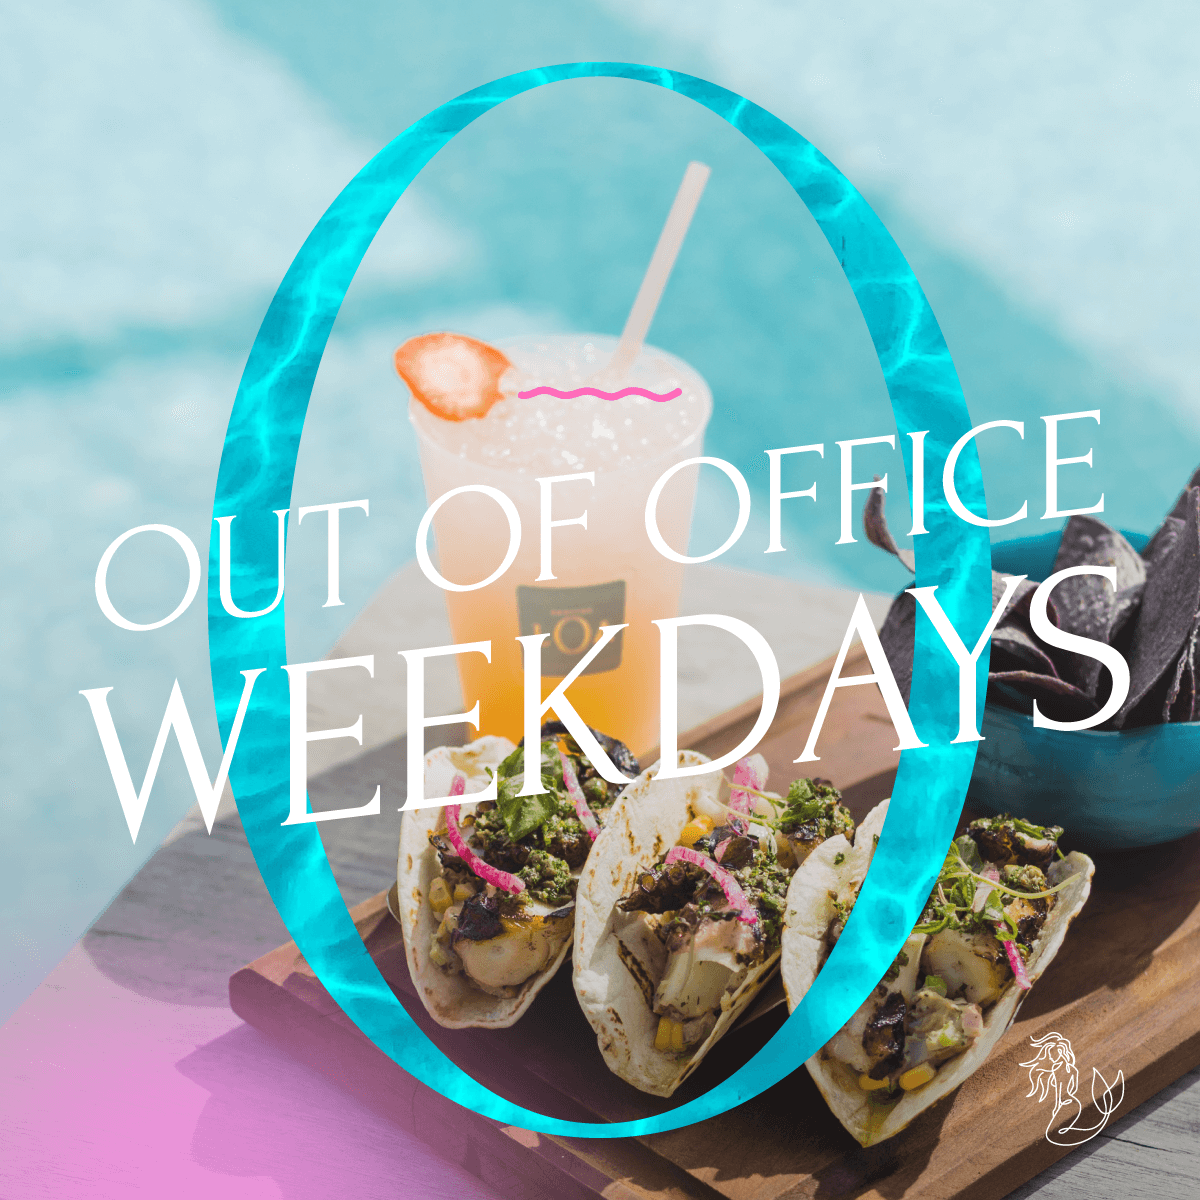 Out of office weekdays at L.O.A.